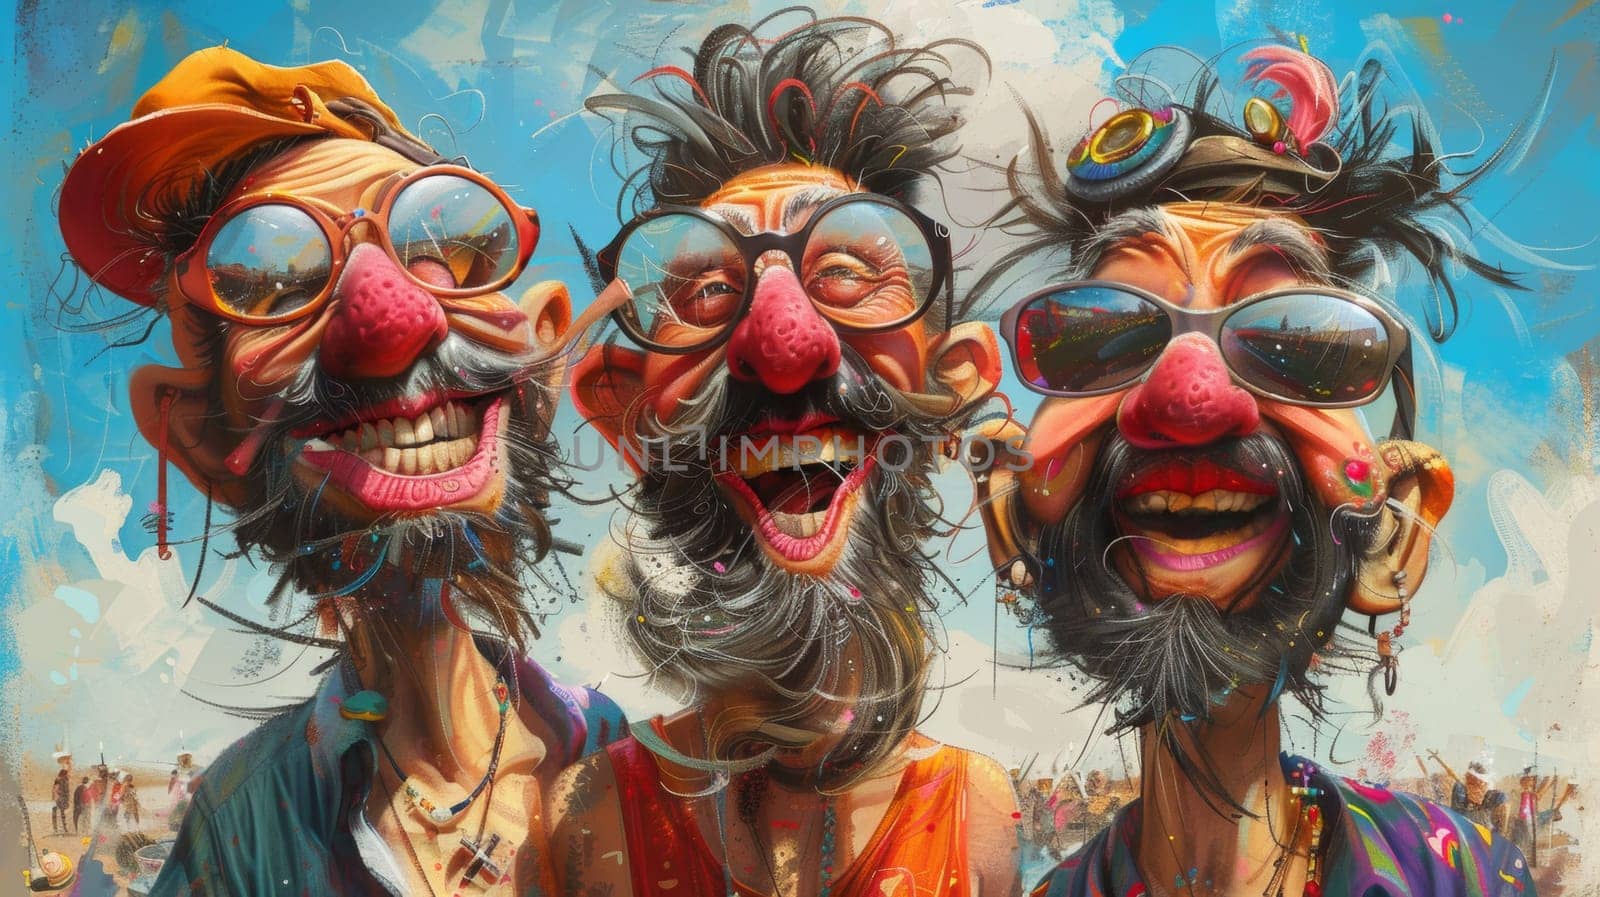 Three men with big noses and glasses are painted on a painting